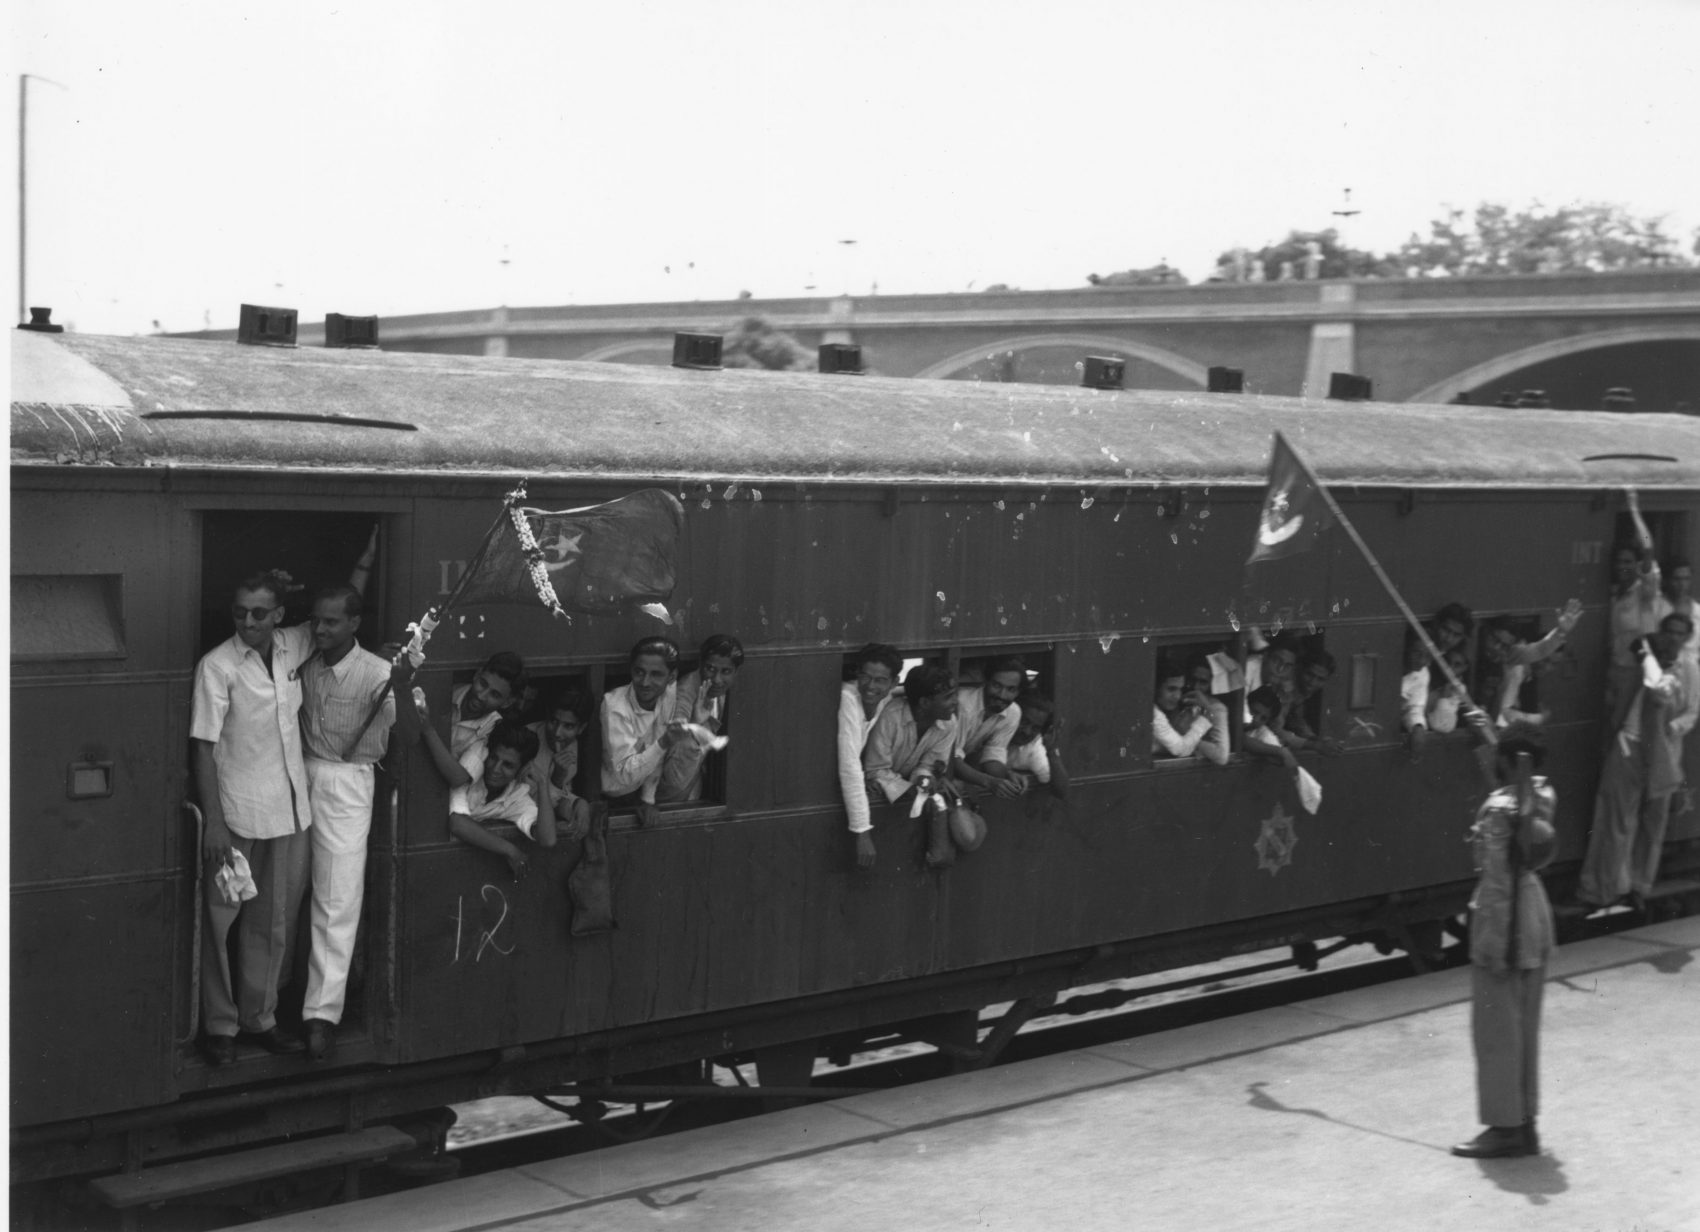 One of 30 special trains leaving New Delhi Station takes the staff of the Pakistan government to Karachi. Six hundred Delhi Muslims were relocated to Pakistan following the partition of India and Pakistan in 1947. (Keystone Features/Getty Images)